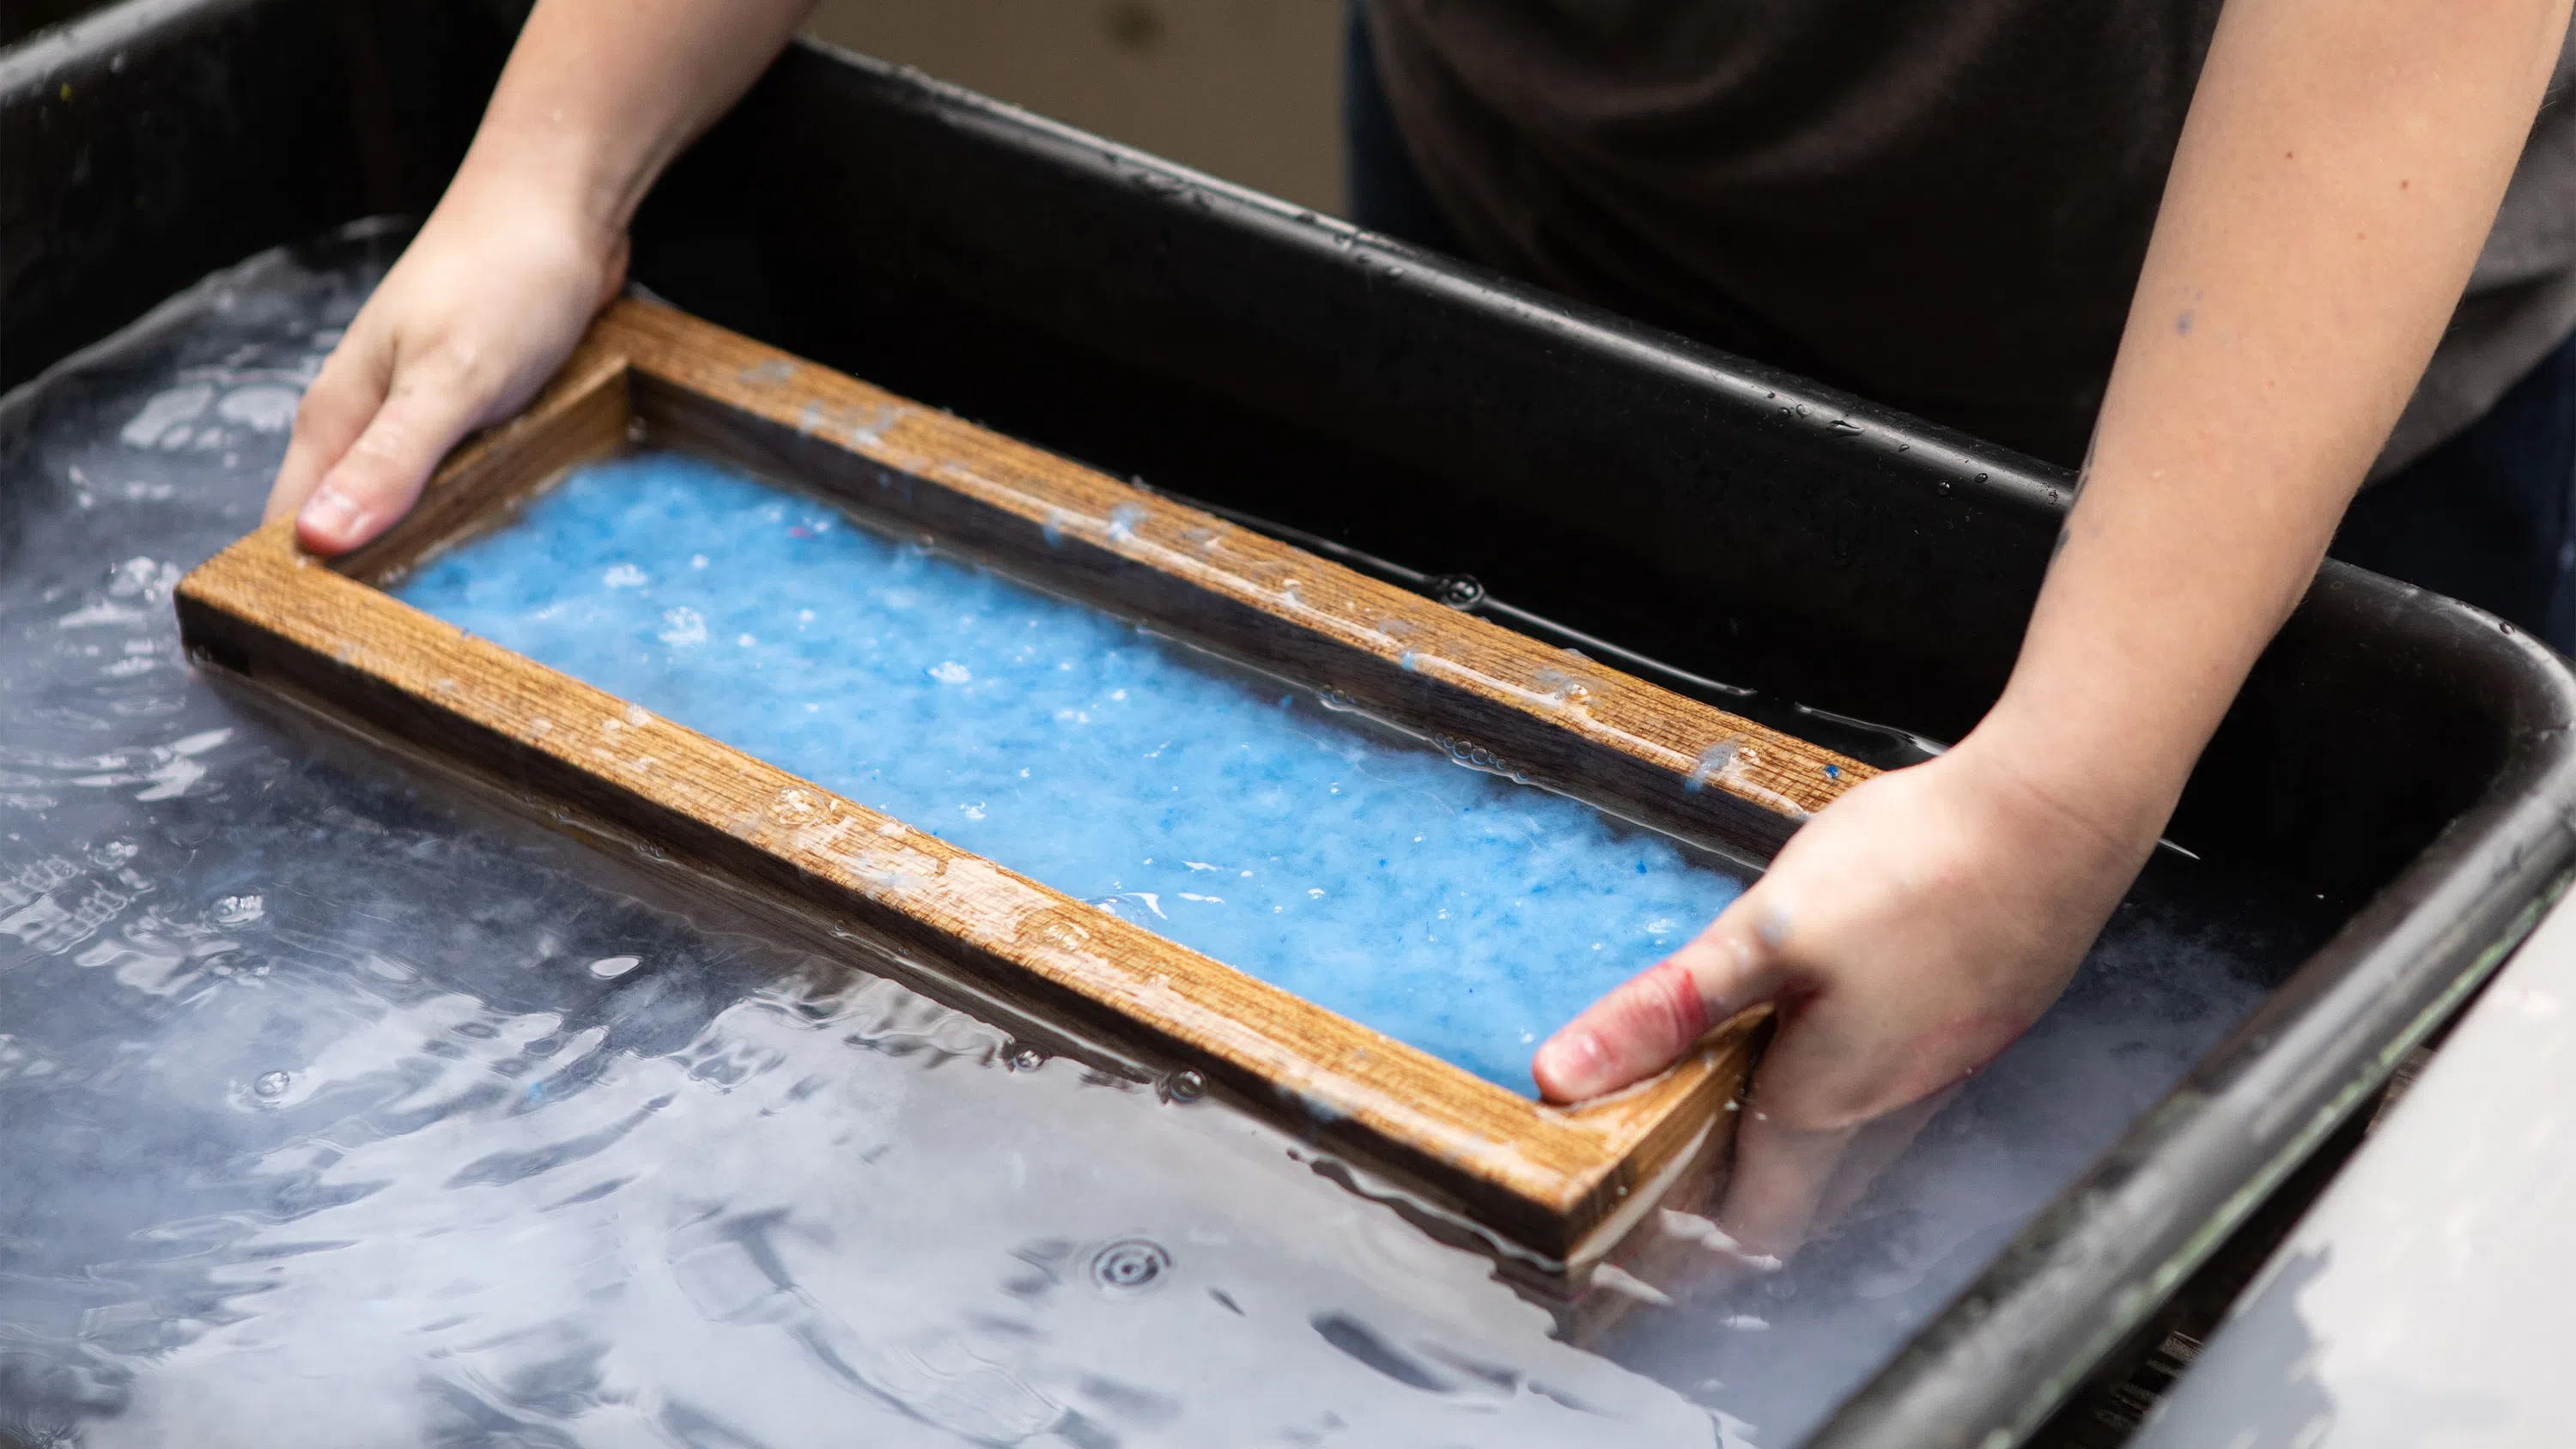 A close-up of hands submerging a screen during the paper-making process.